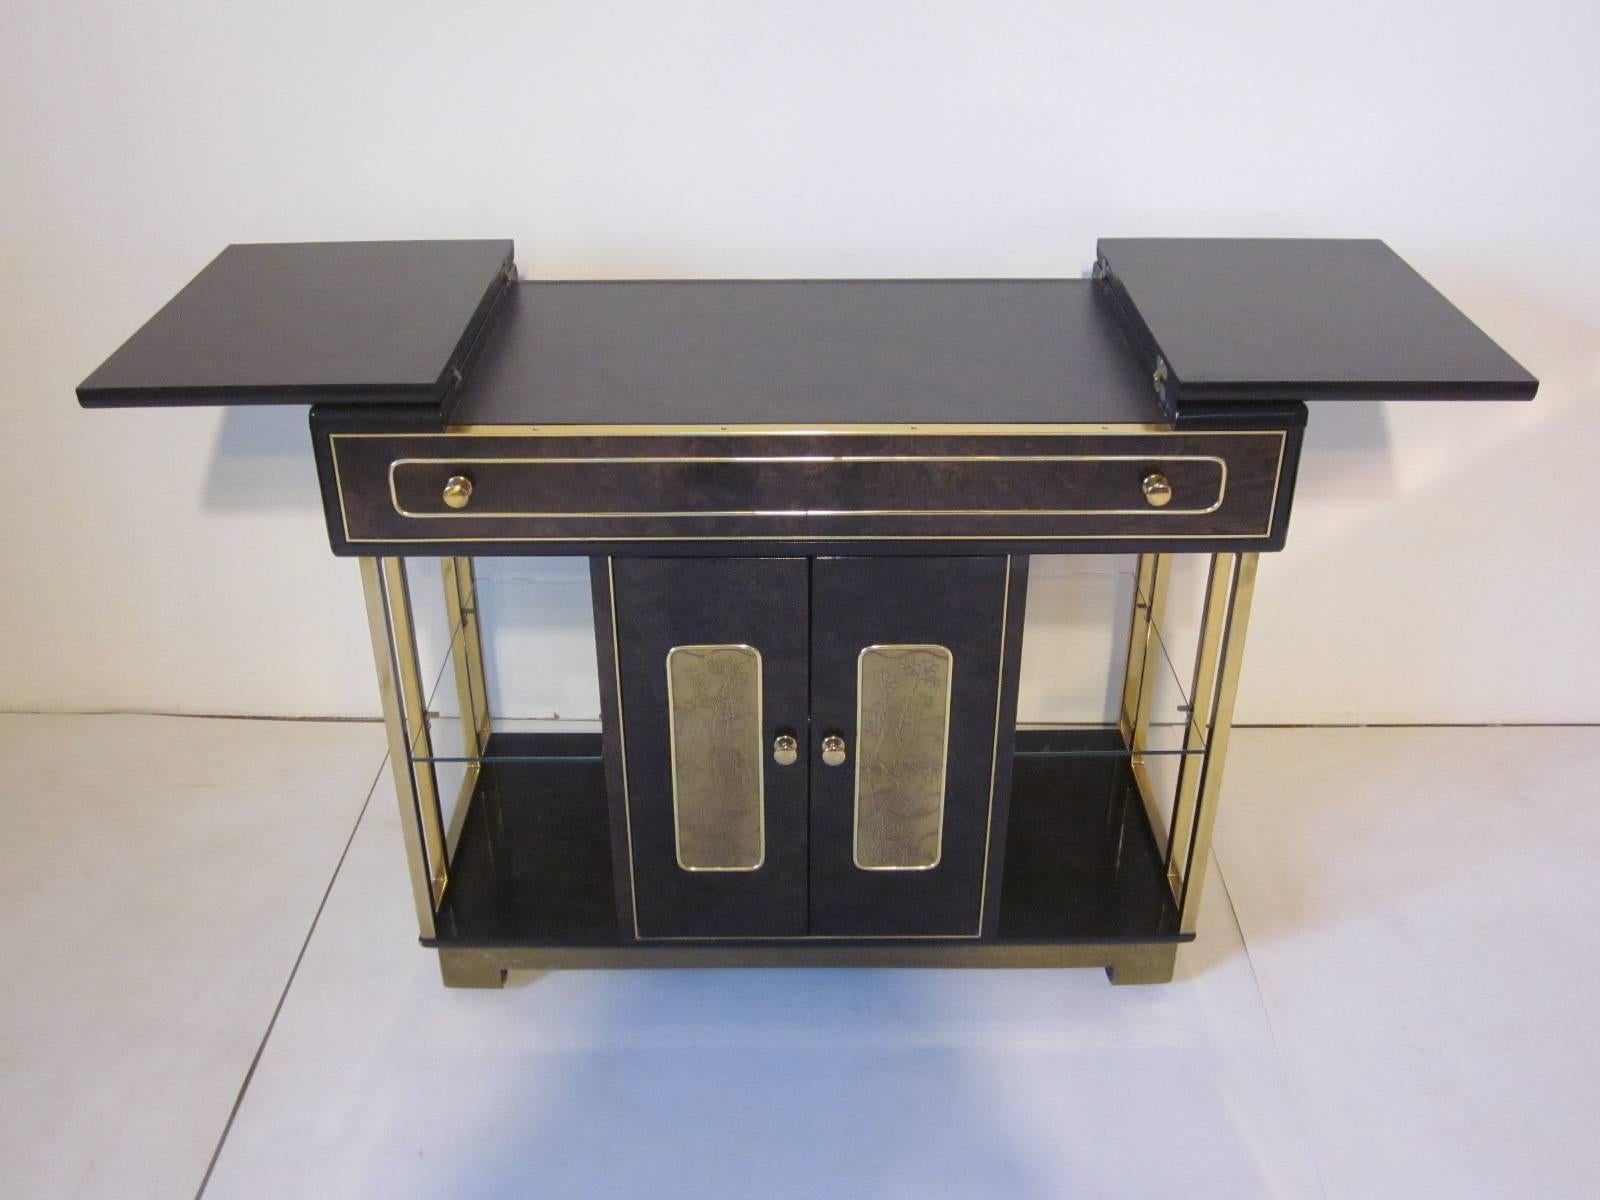 A dark ebony toned burl wood bar or serving cart with acid etched brass door details, internal shelve, brass frame and pulls, a glass shelve to each side, pull-out drawer and wheels. A quality well made piece of furniture with a bit of glam